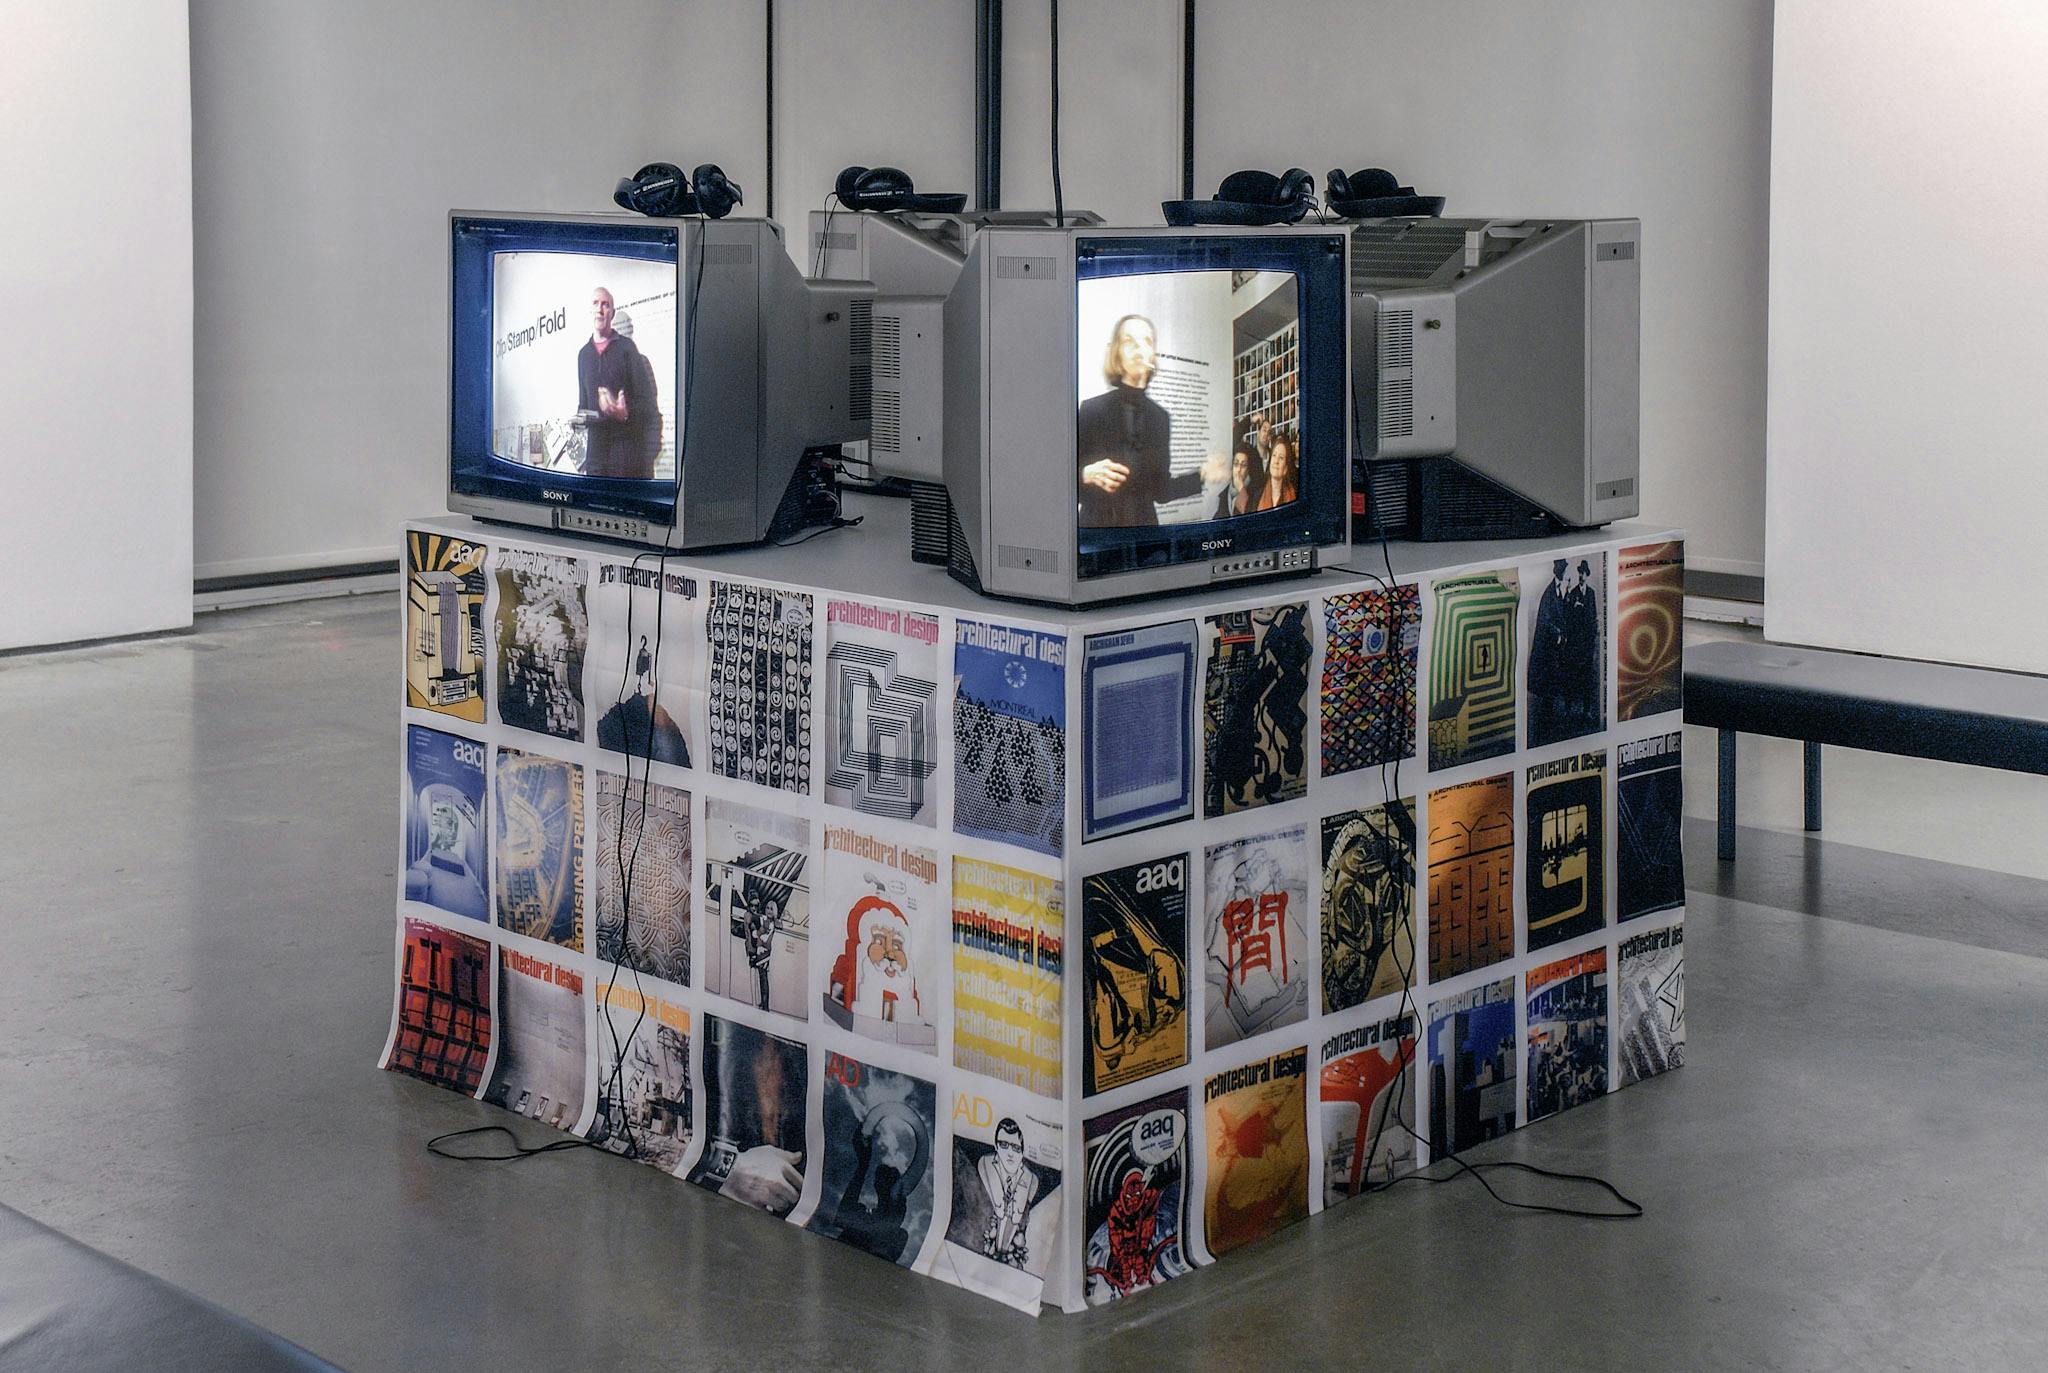 Four CRT TVs are placed on a large pedestal. They play different videos of a person giving a speech in public. The pedestal is covered by the printed images of various magazine covers.